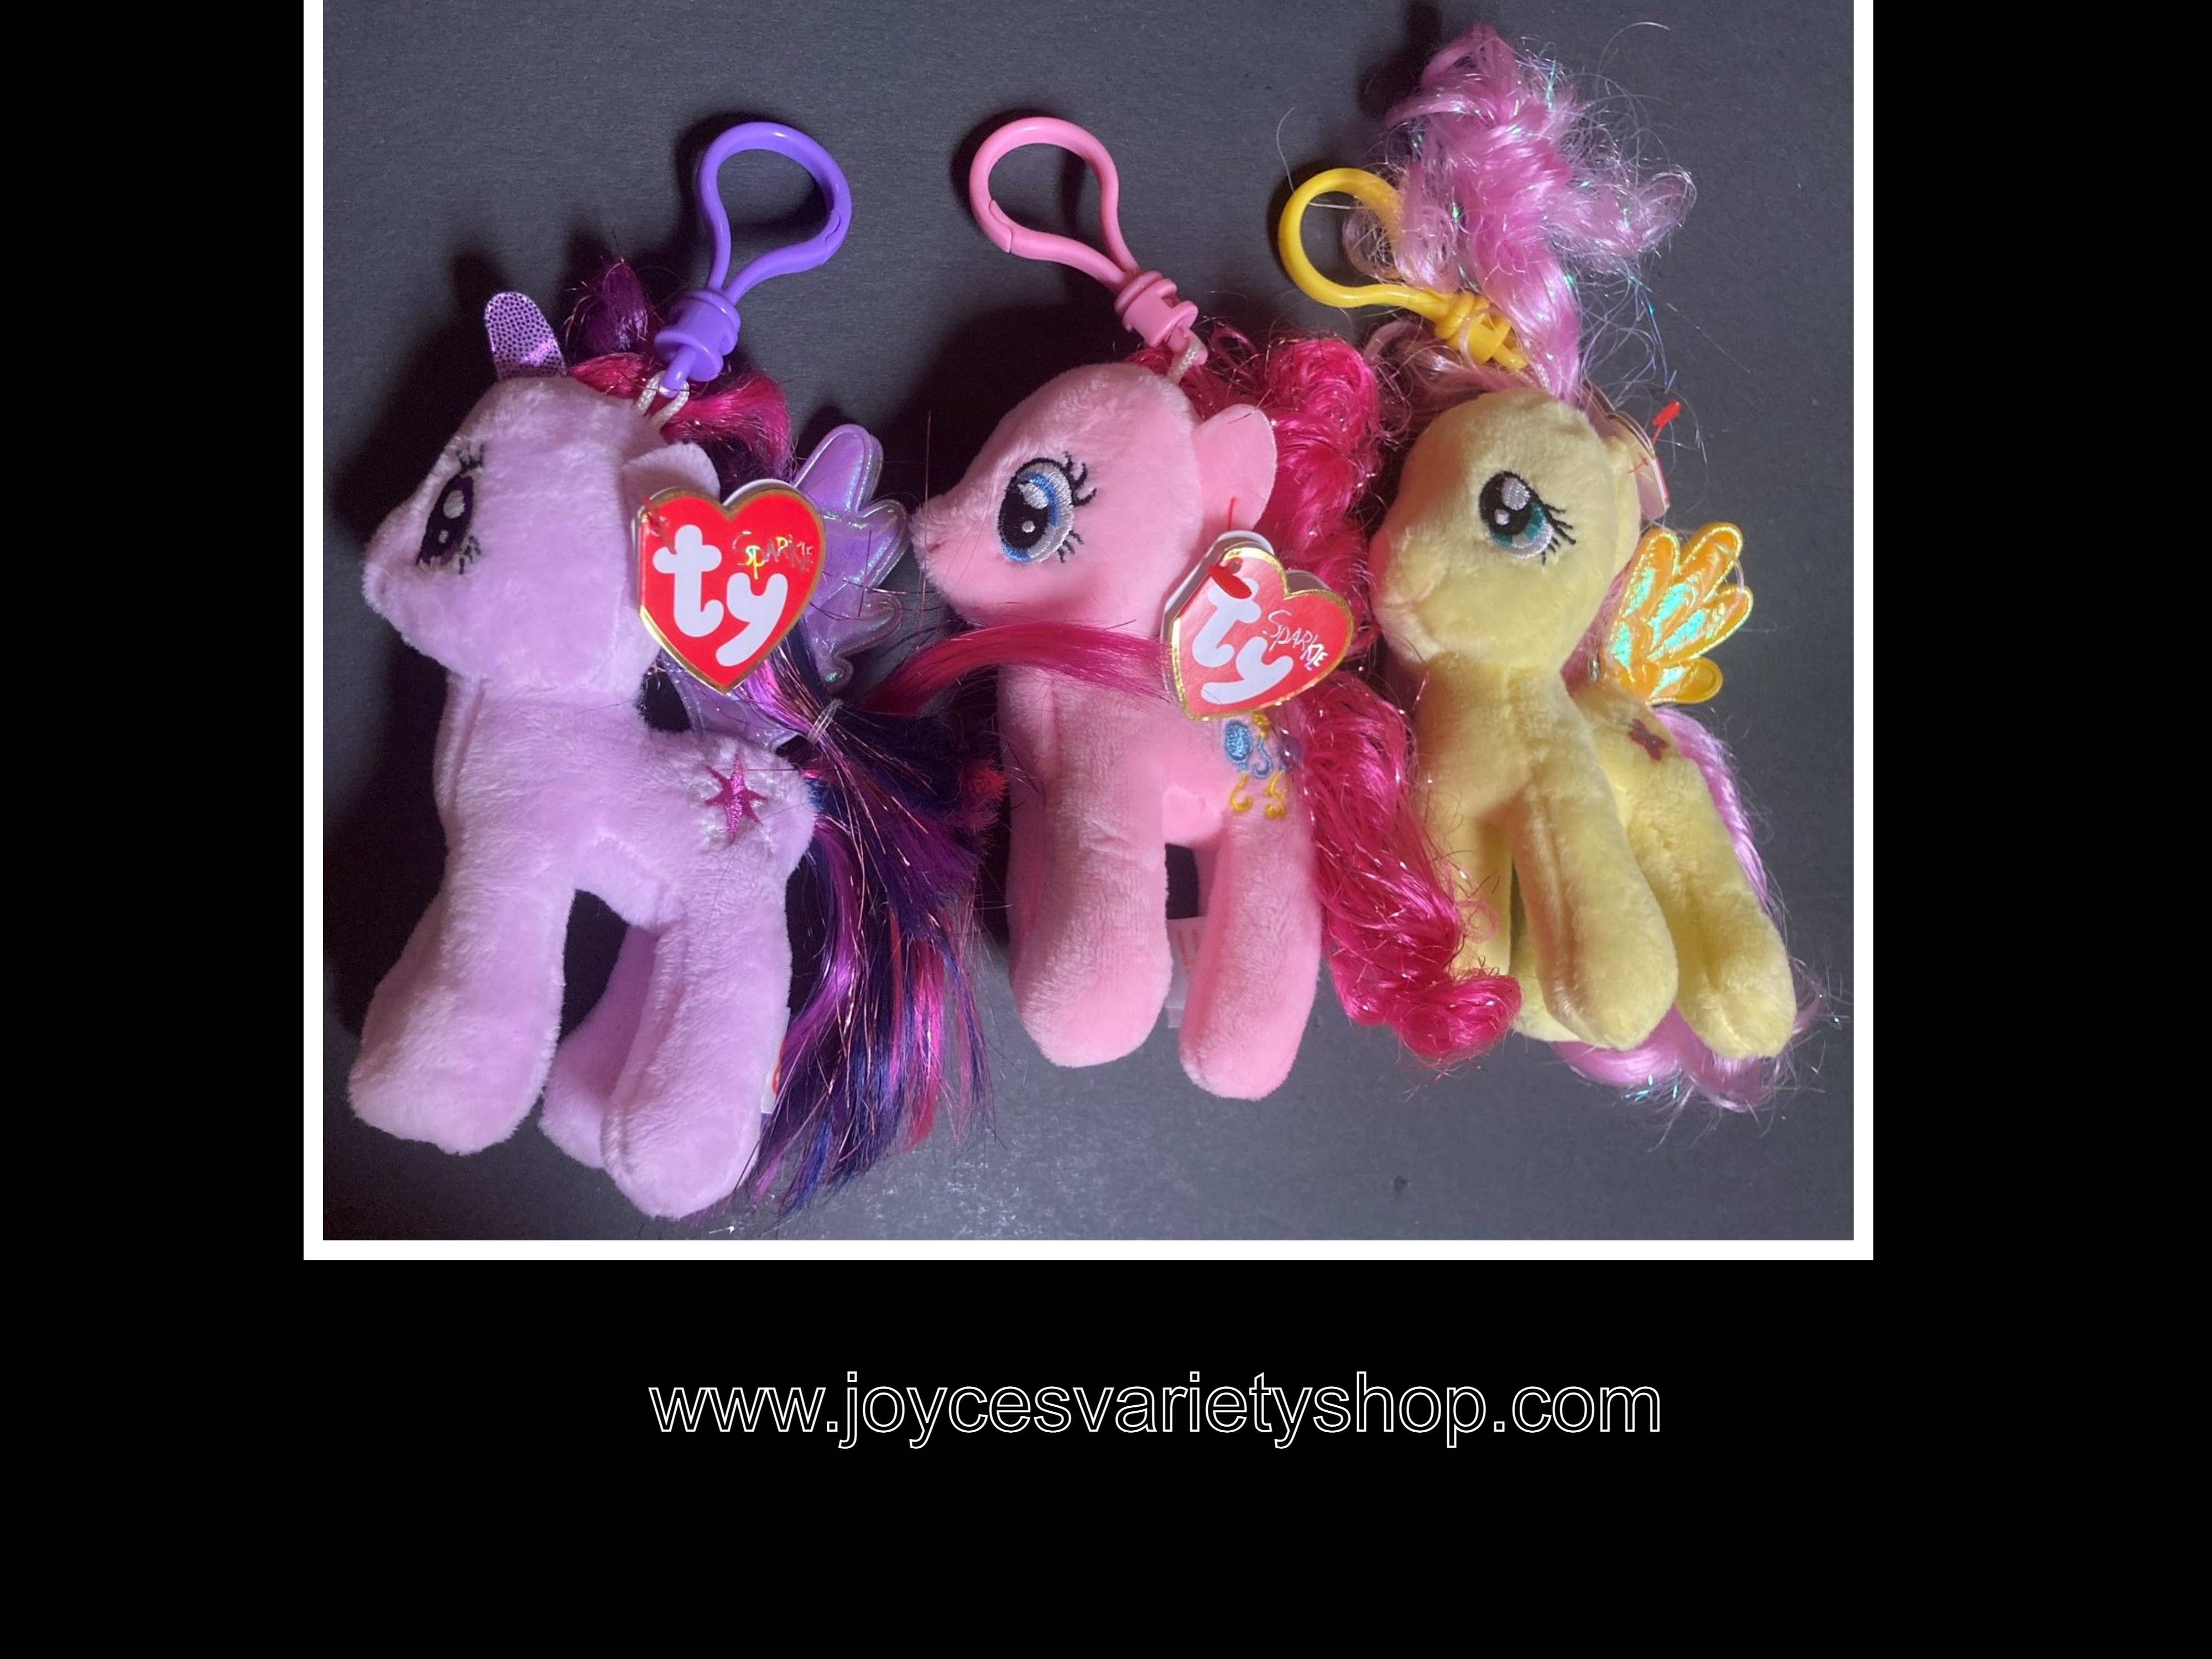 TY Sparkle My Little Pony NWT Set of 3 Stuffed Plush Ponies 4.5"H Free Shipping